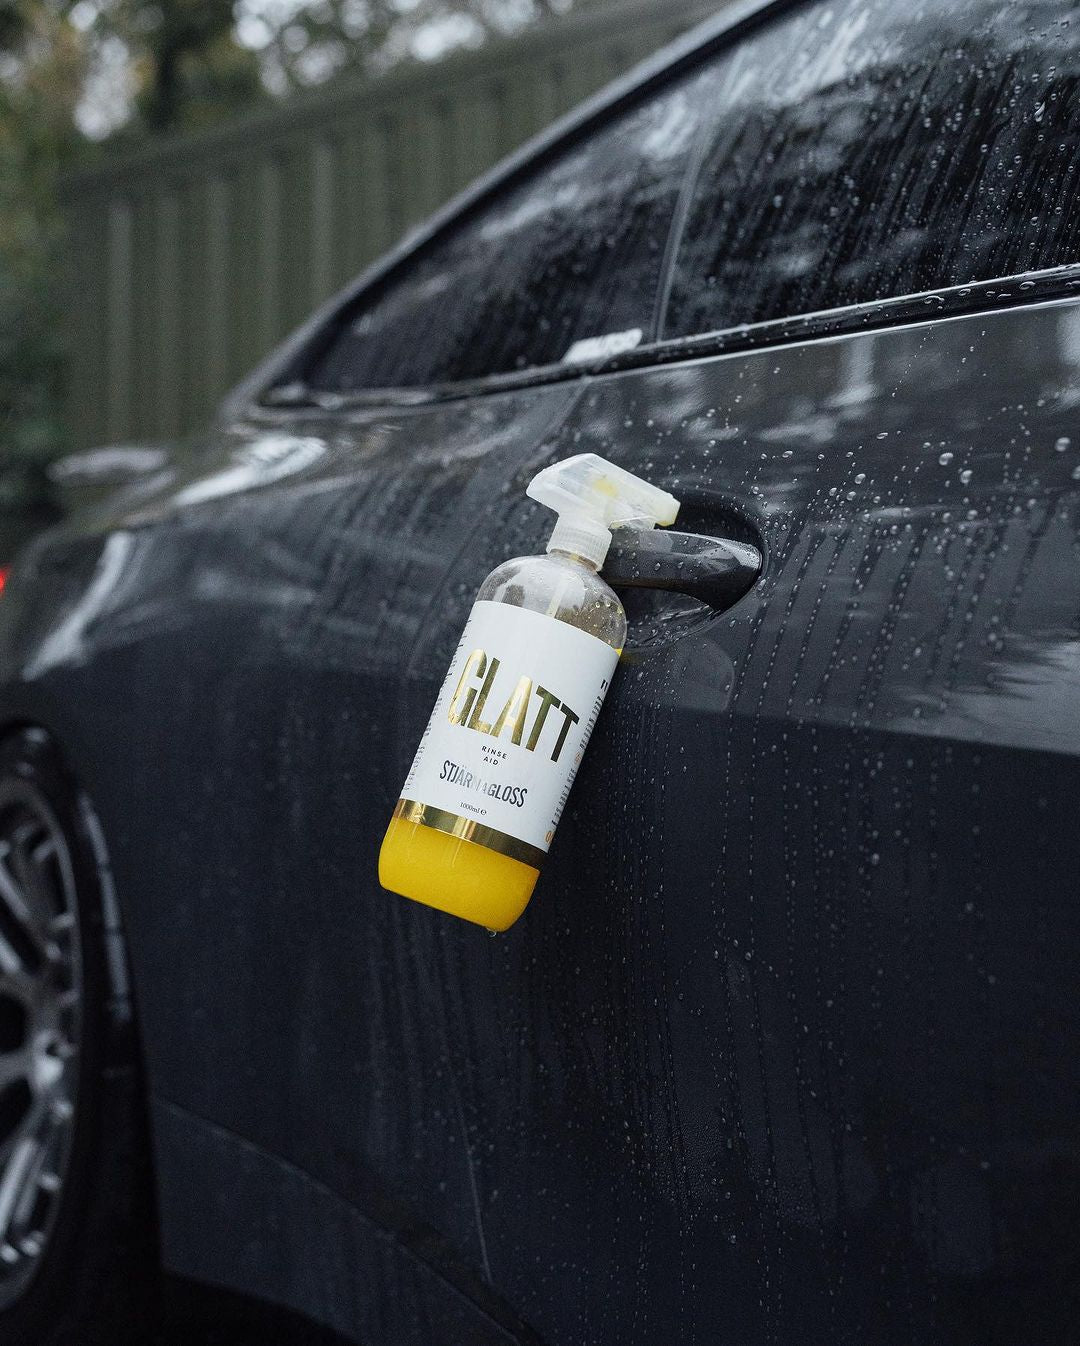 Stjarnagloss Glatt hydrophobic and Water repellent rinse aid for coating your car quickly after washing. Stjarnagloss Ireland, Stjarnagloss Cork Ireland